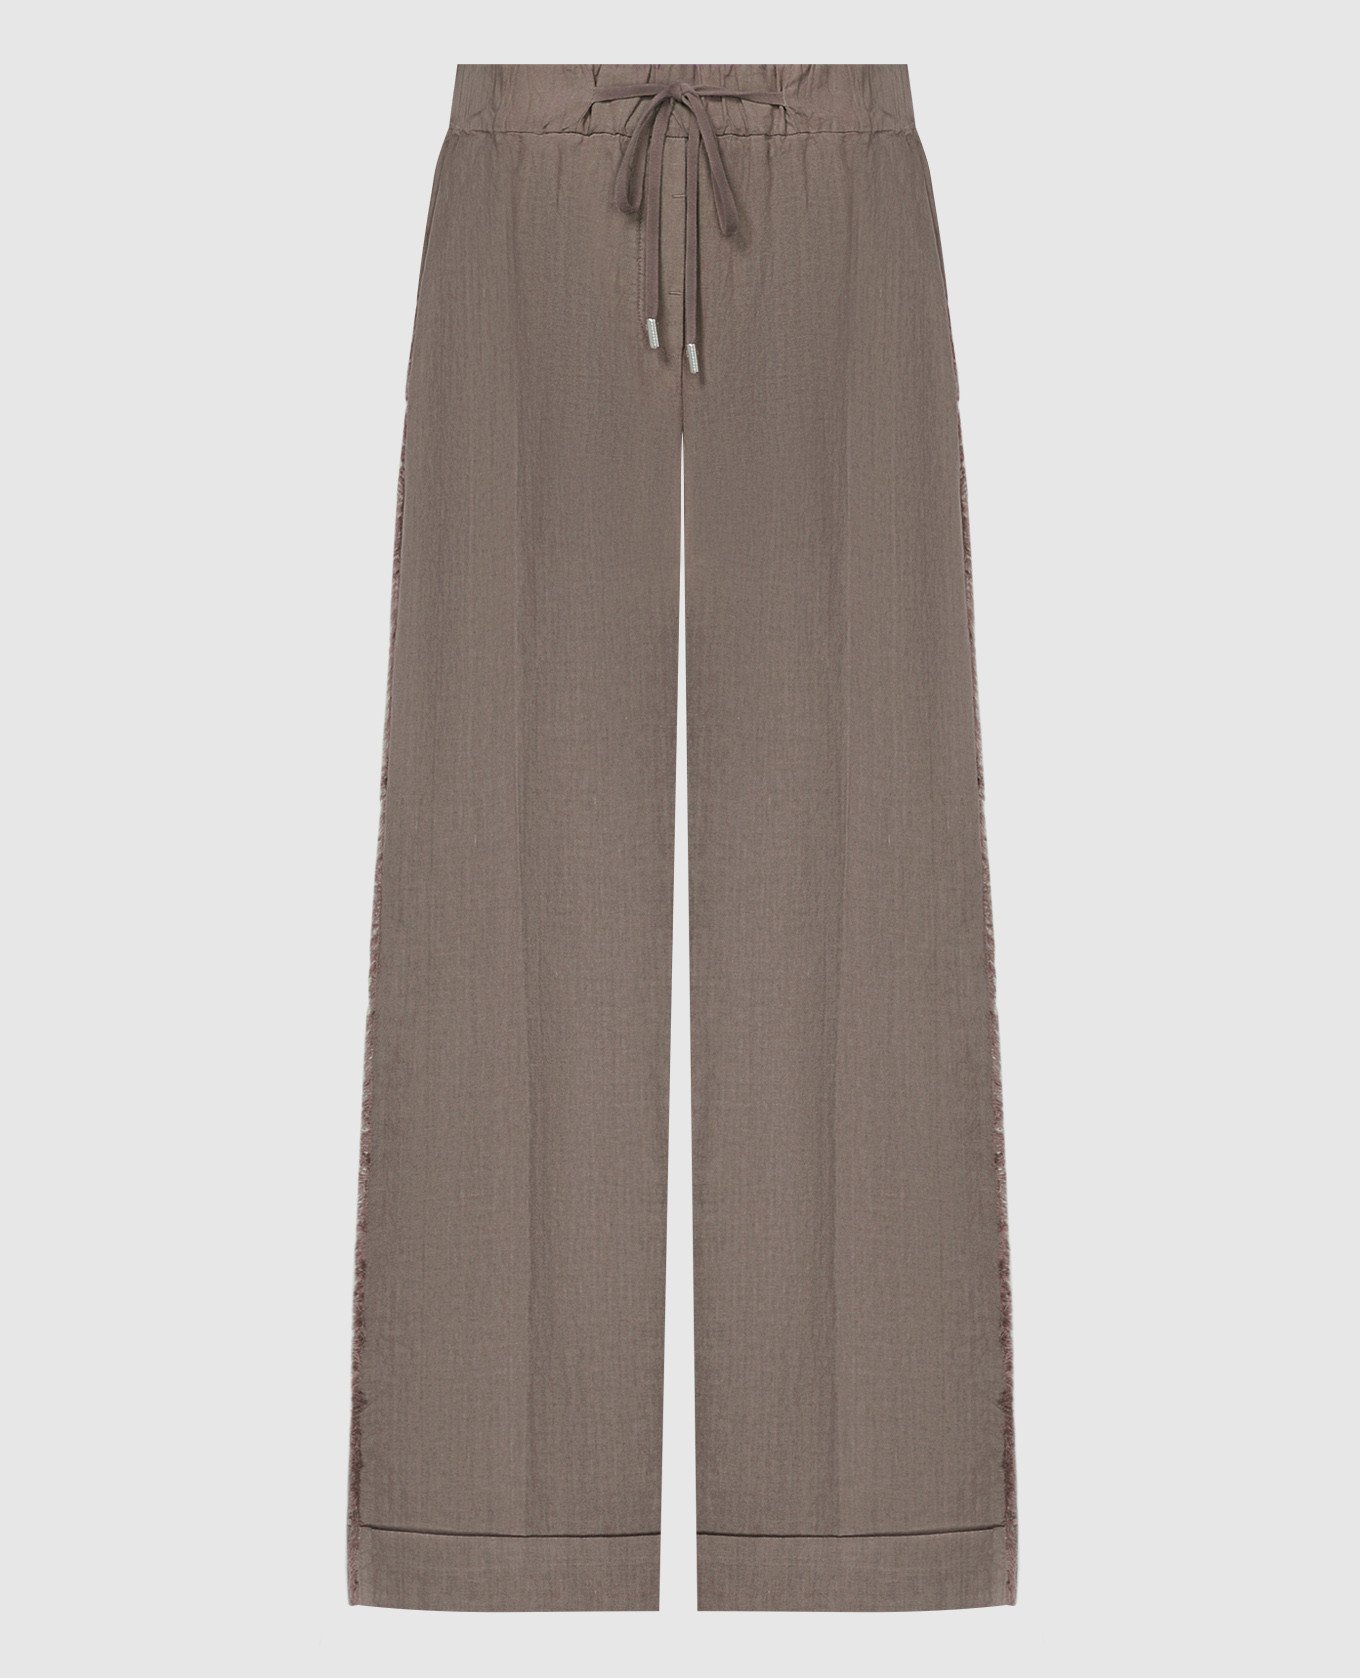 Brown linen pants with fringe